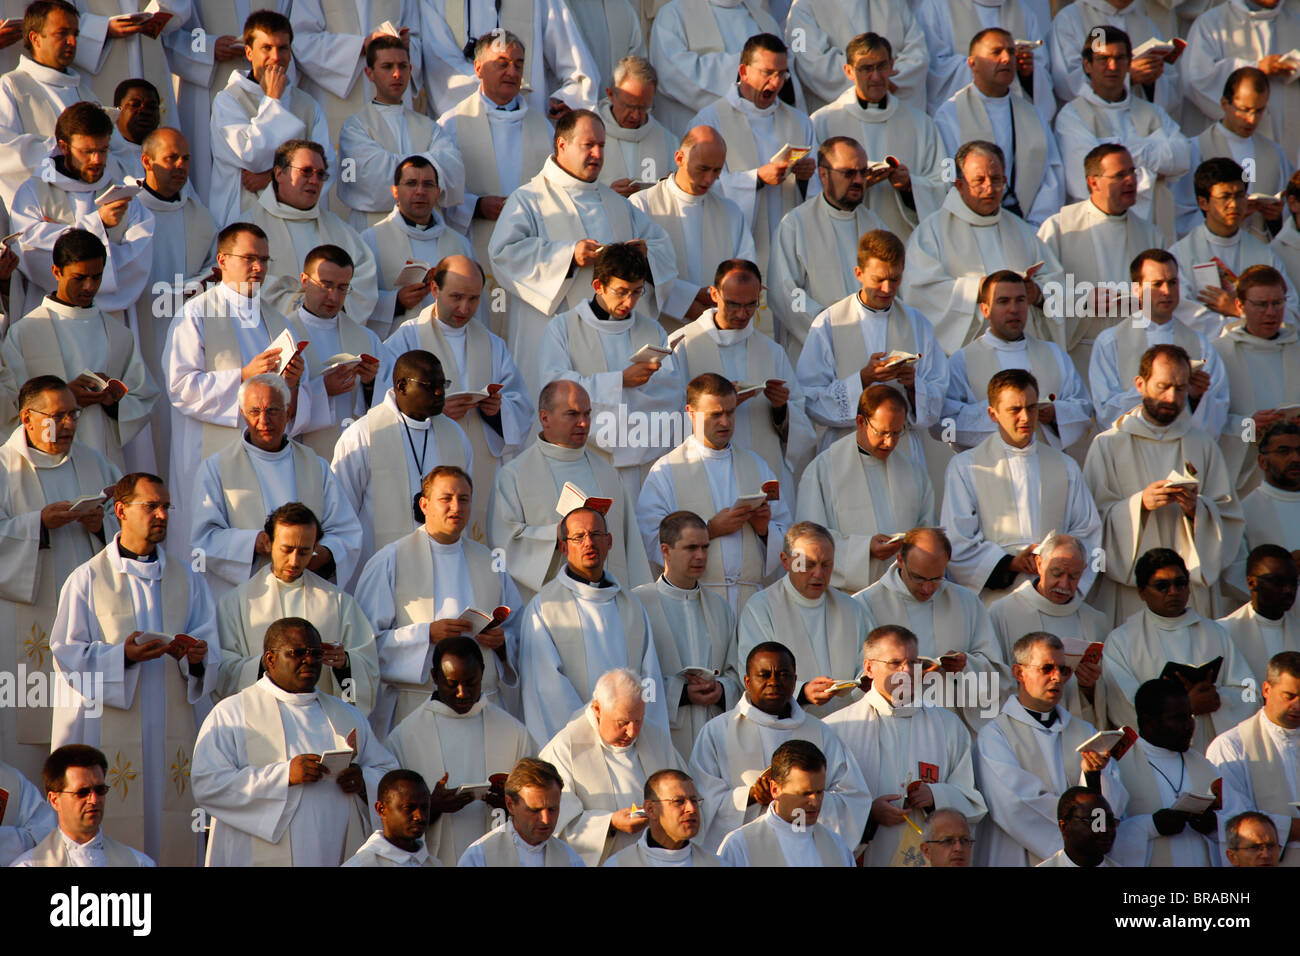 Priests and seminarists at Mass celebrated by Pope Benedict XVI, Paris, France, Europe Stock Photo